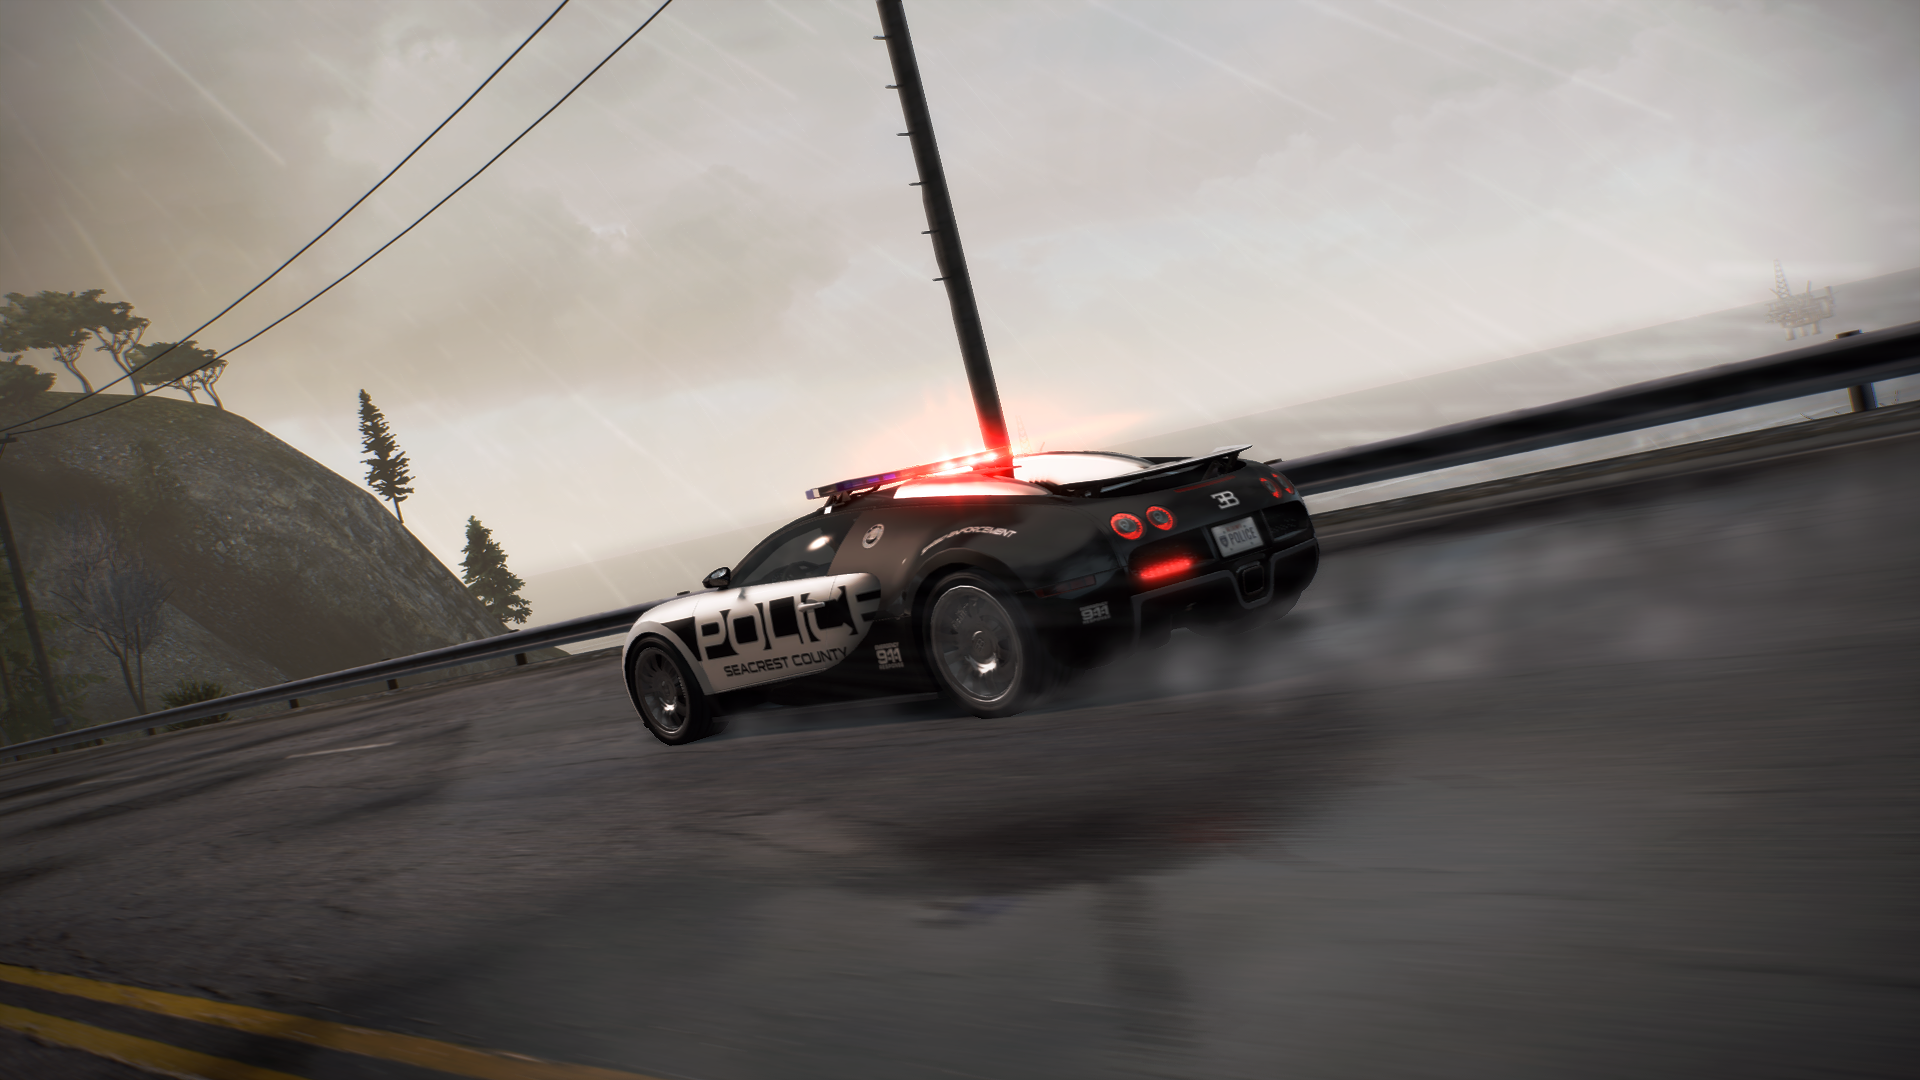 Need For Speed Hot Pursuit Bugatti Veyron Bugatti Car Vehicle Police Cars Video Games 1920x1080